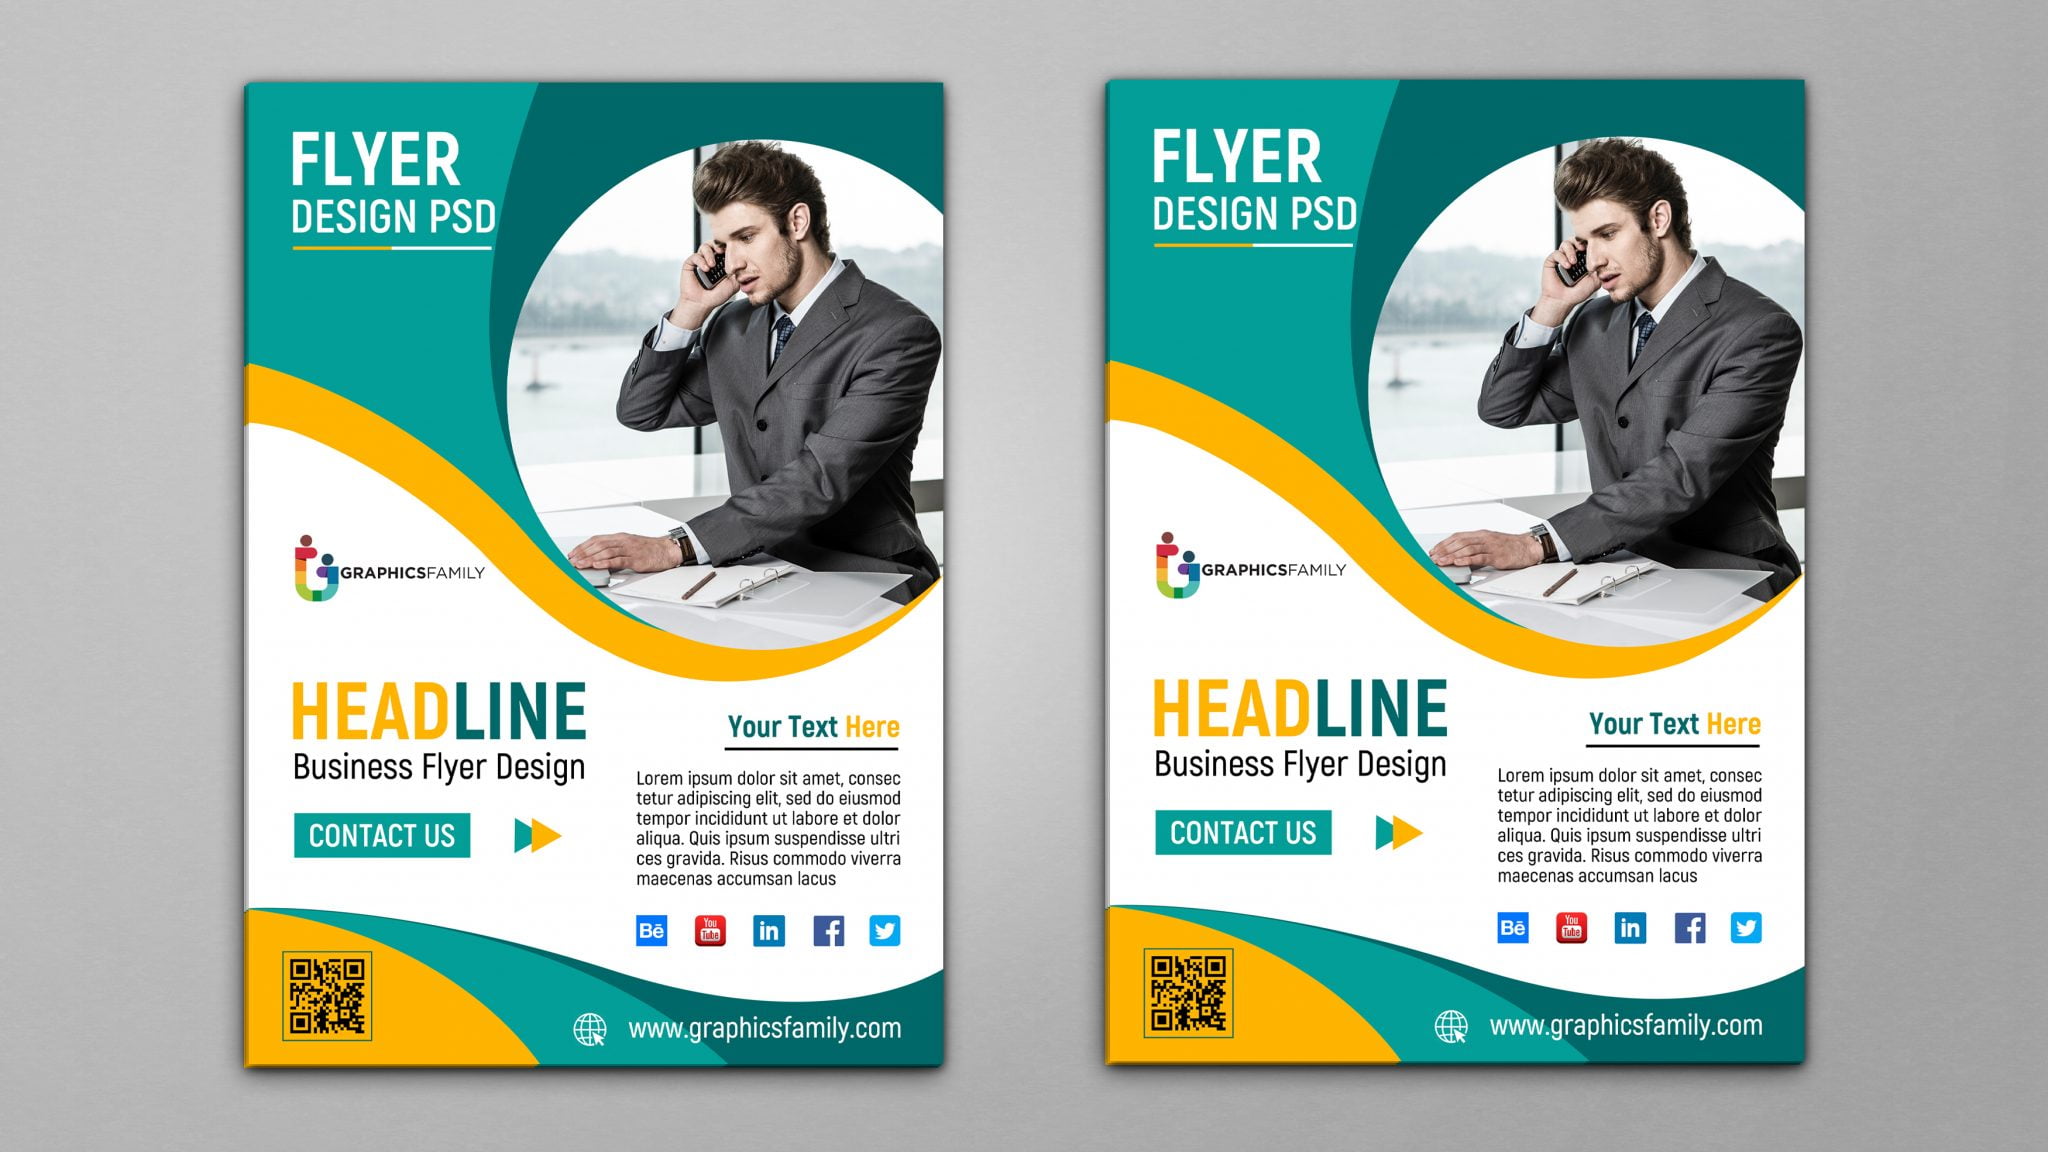 Business Flyer Template Design PSD GraphicsFamily